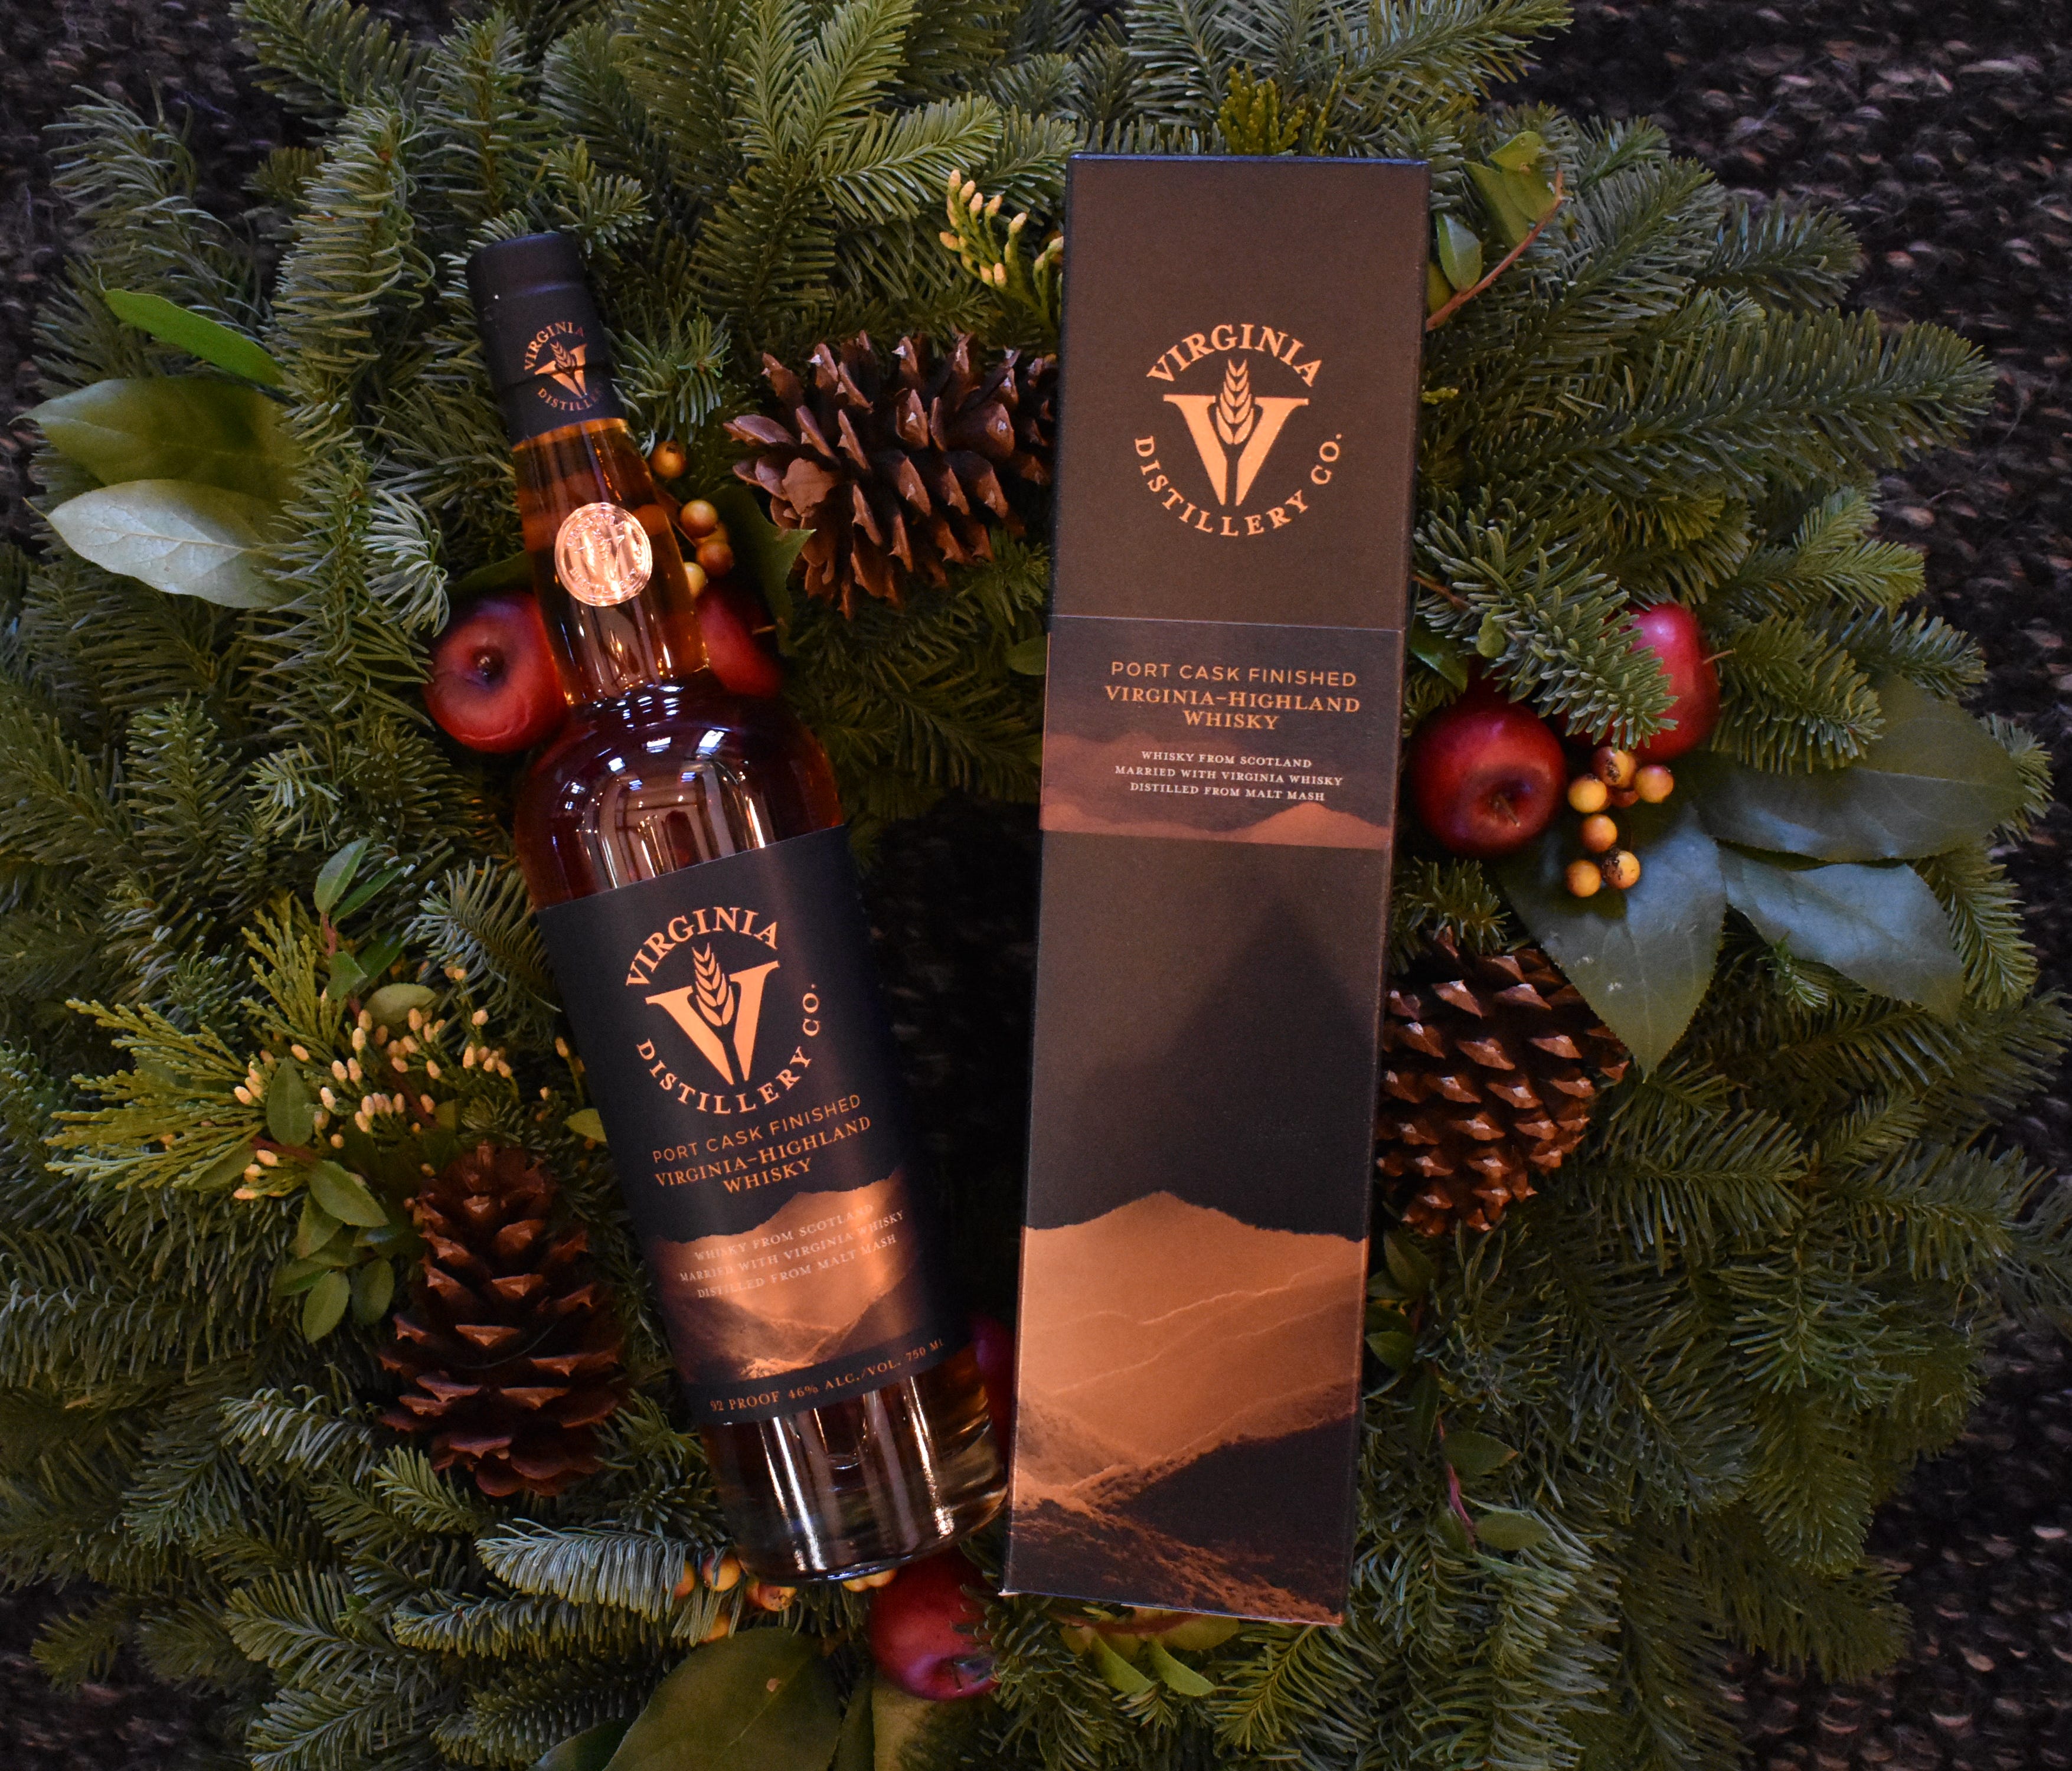 Virginia Distillery Company, nestled among the Blue Ridge Mountains in Virginia's Nelson County, is producing an American single malt whisky. The distillery's Port Cask Finished Virginia-Highland Whisky is available in a seasonal holiday gift box, ma